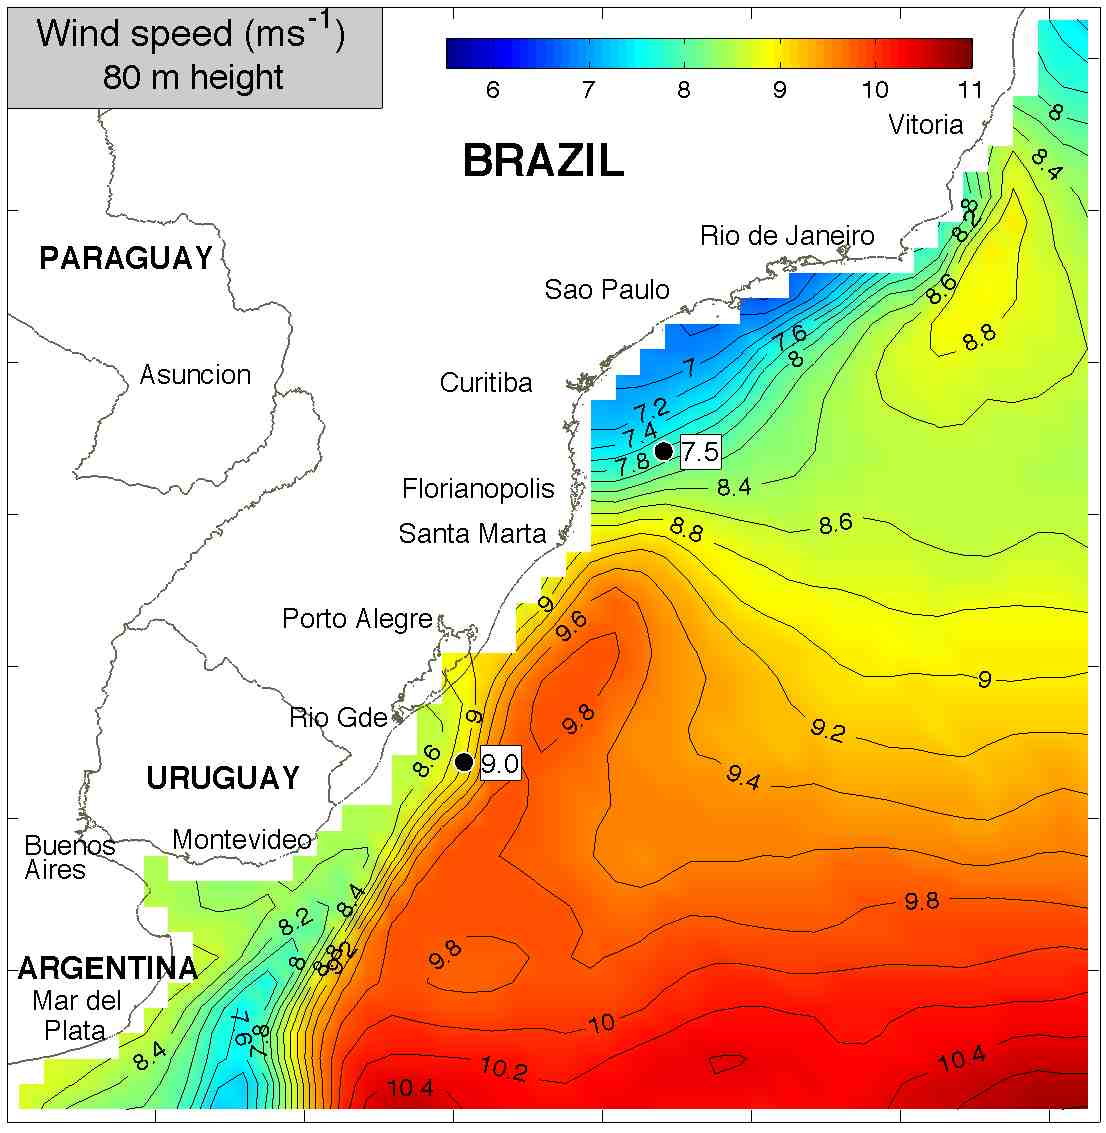 Wind speeds at a height of 80 meters (262 feet), or approximately the hub height of a turbine, indicate a viable wind resource in the study area. If the area were fully developed for offshore wind, it could supply more than Brazil's current electricity needs. Image is compiled from satellite, buoy, and bathymetric data. (From F. Pimenta, courtesy Elsevier Renewable Energy)